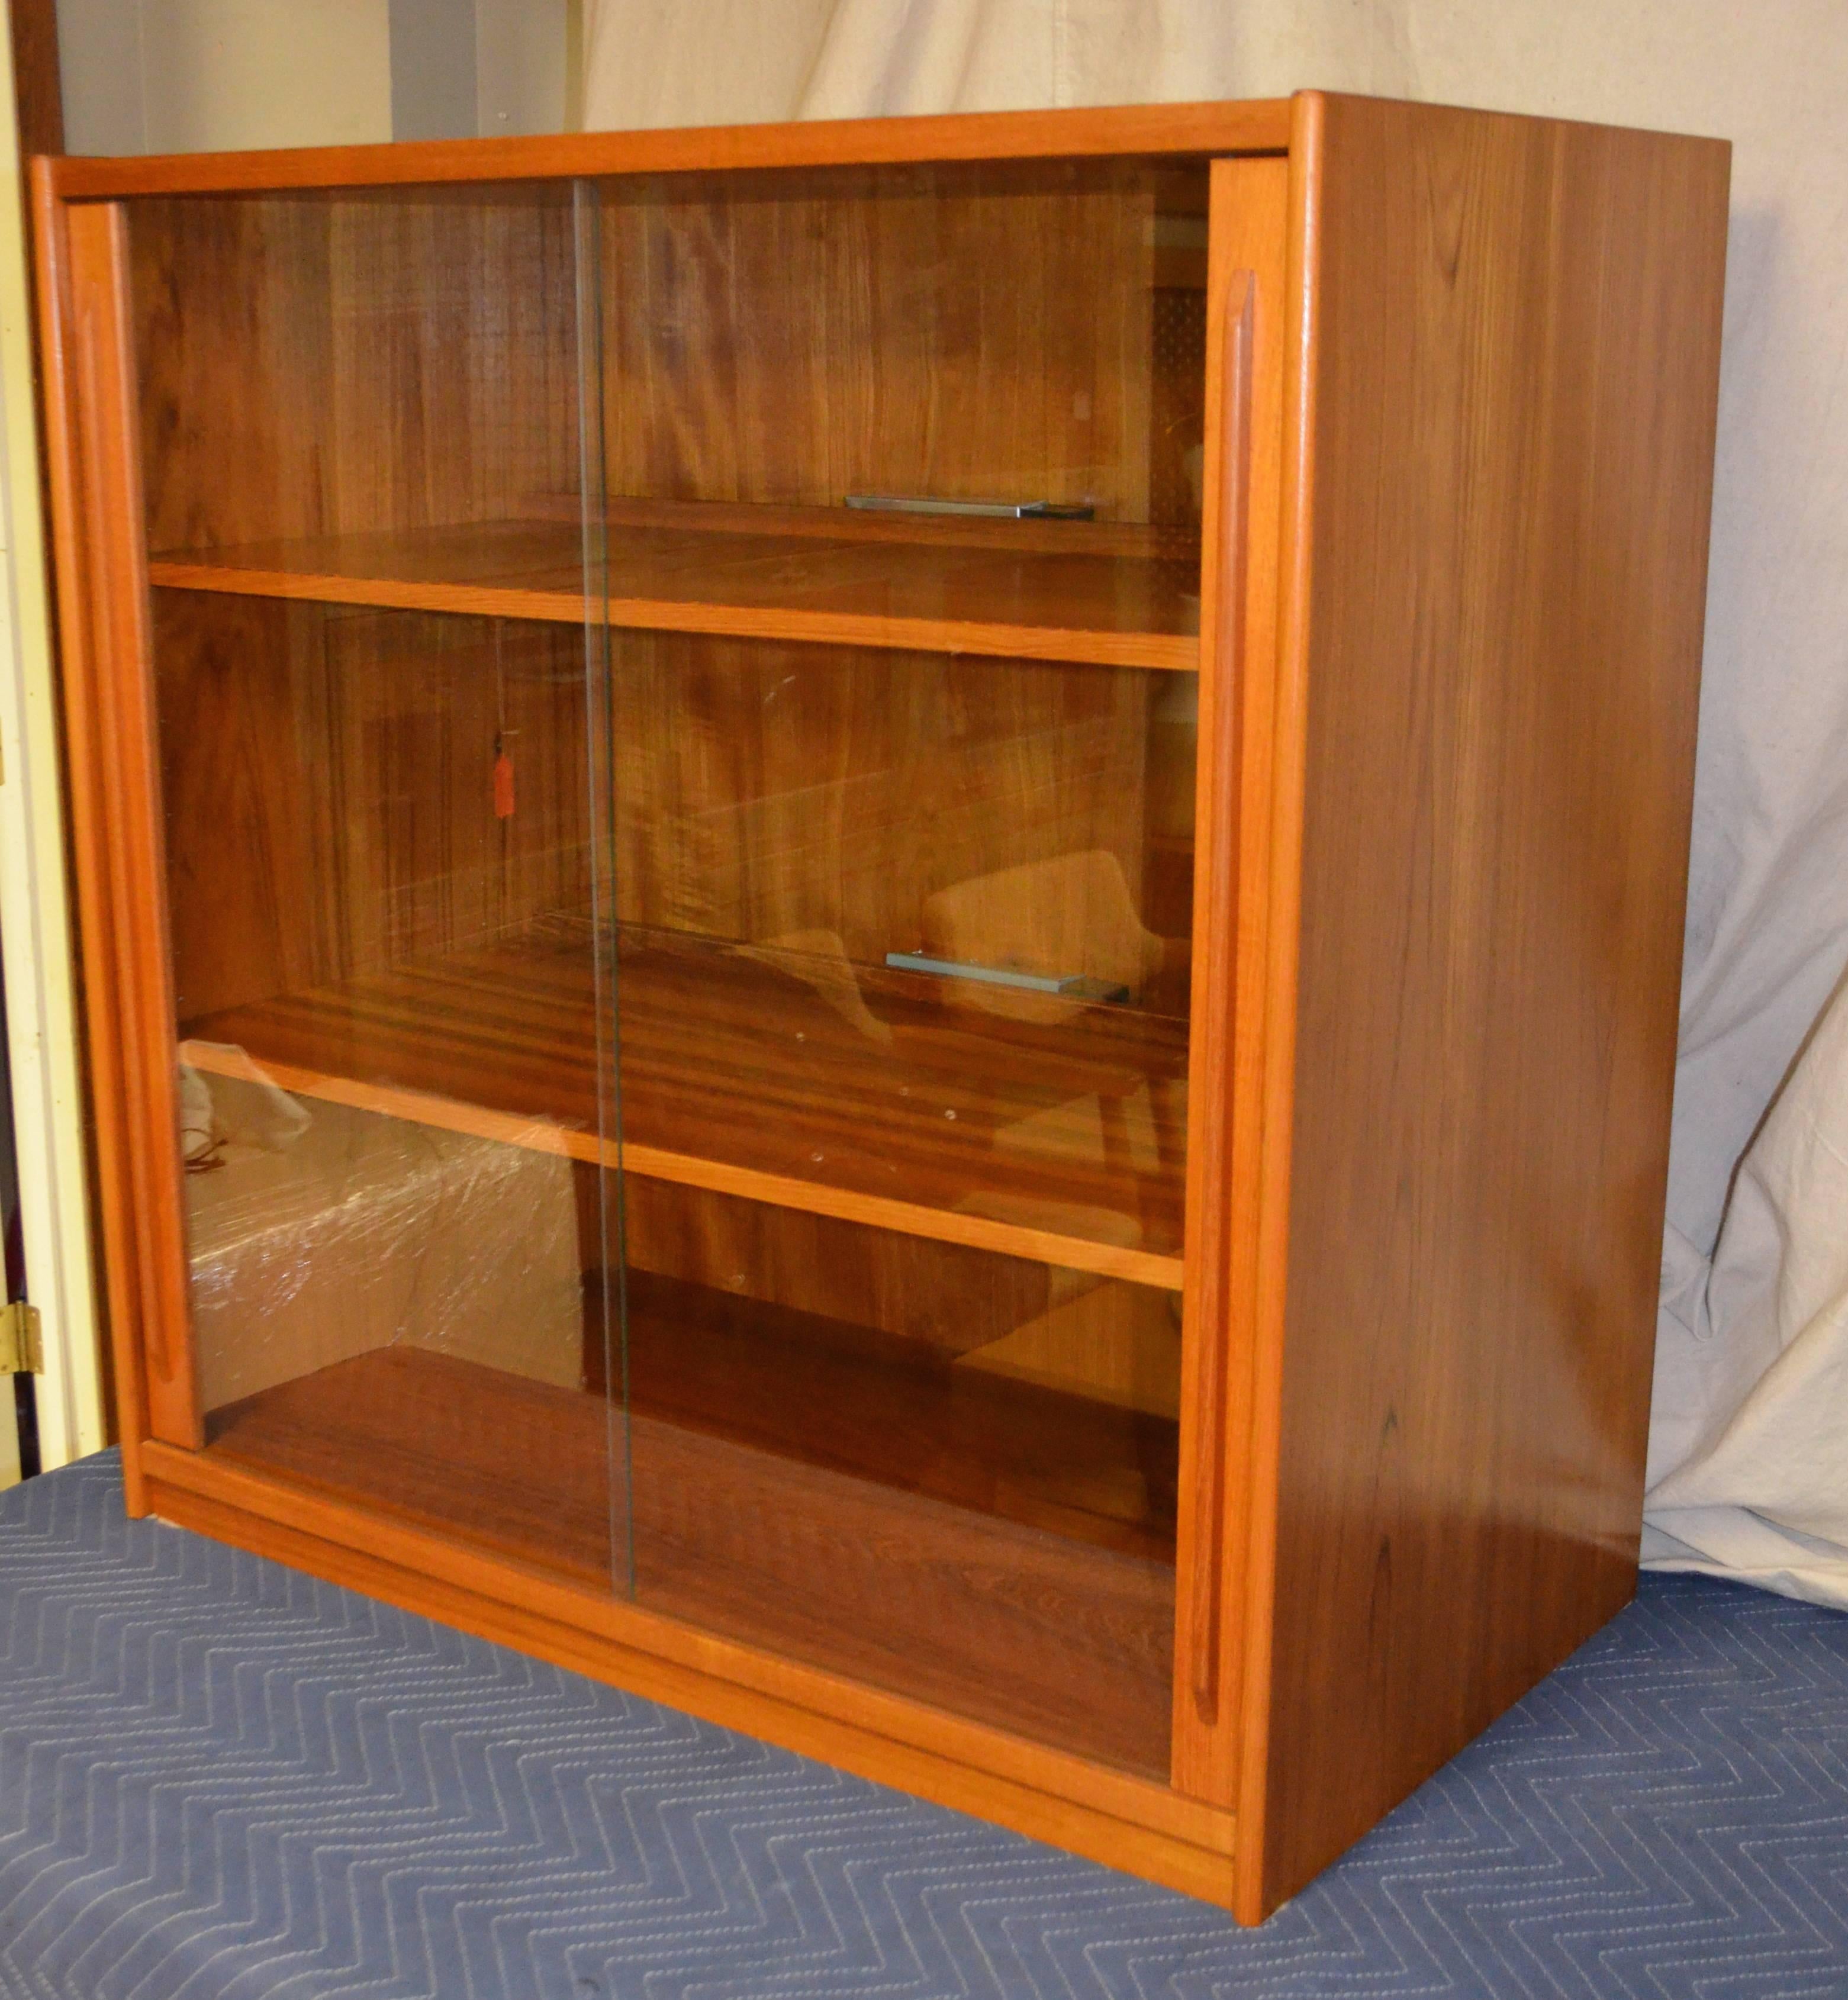 Midcentury teak storage cabinet from Denmark. Wired for electronics with sliding glass doors. A Classic period piece in great shape. Highly functional.